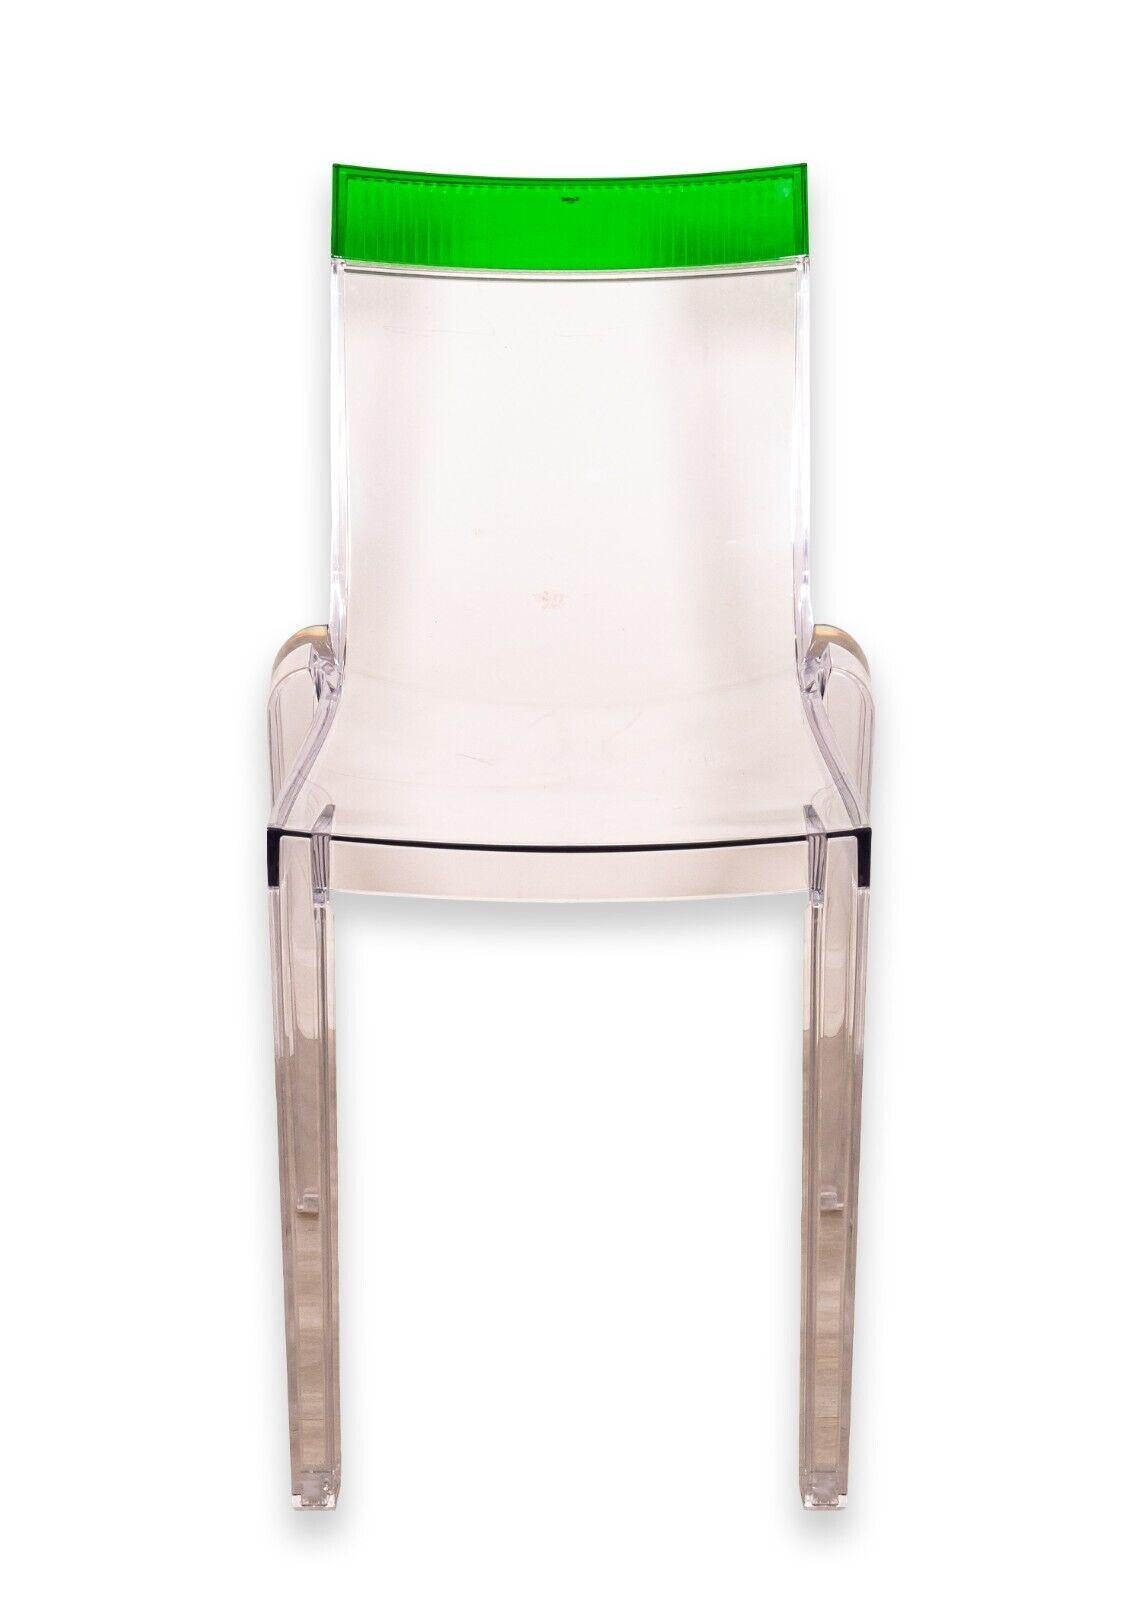 A Kartell Hi Cut by Philippe Starck contemporary chair. This lovely modern accent chair features a full molded acrylic construction with a strip of emerald green at the top of the chair. The Kartell tagging can be found on the top back of the chair